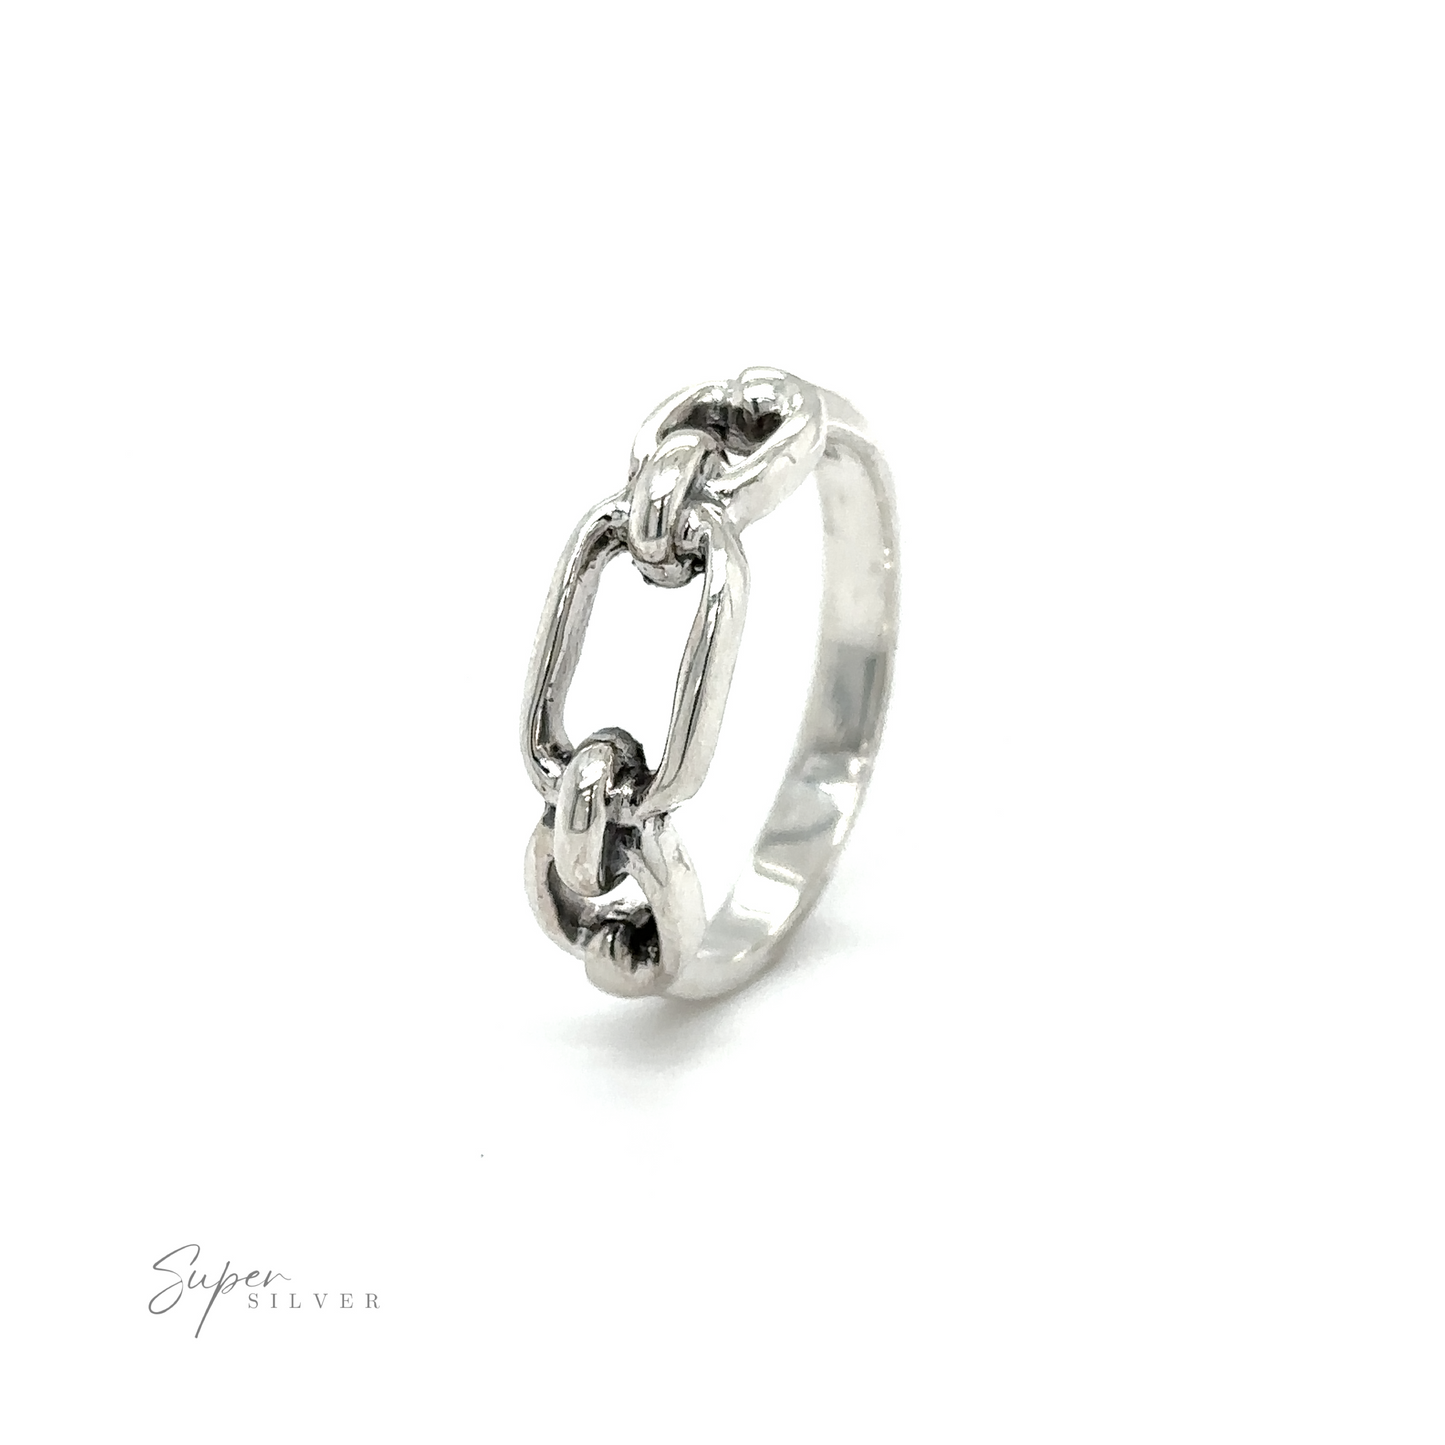 A versatile Thick Chain Link Ring with a modern fashion by Super Silver.